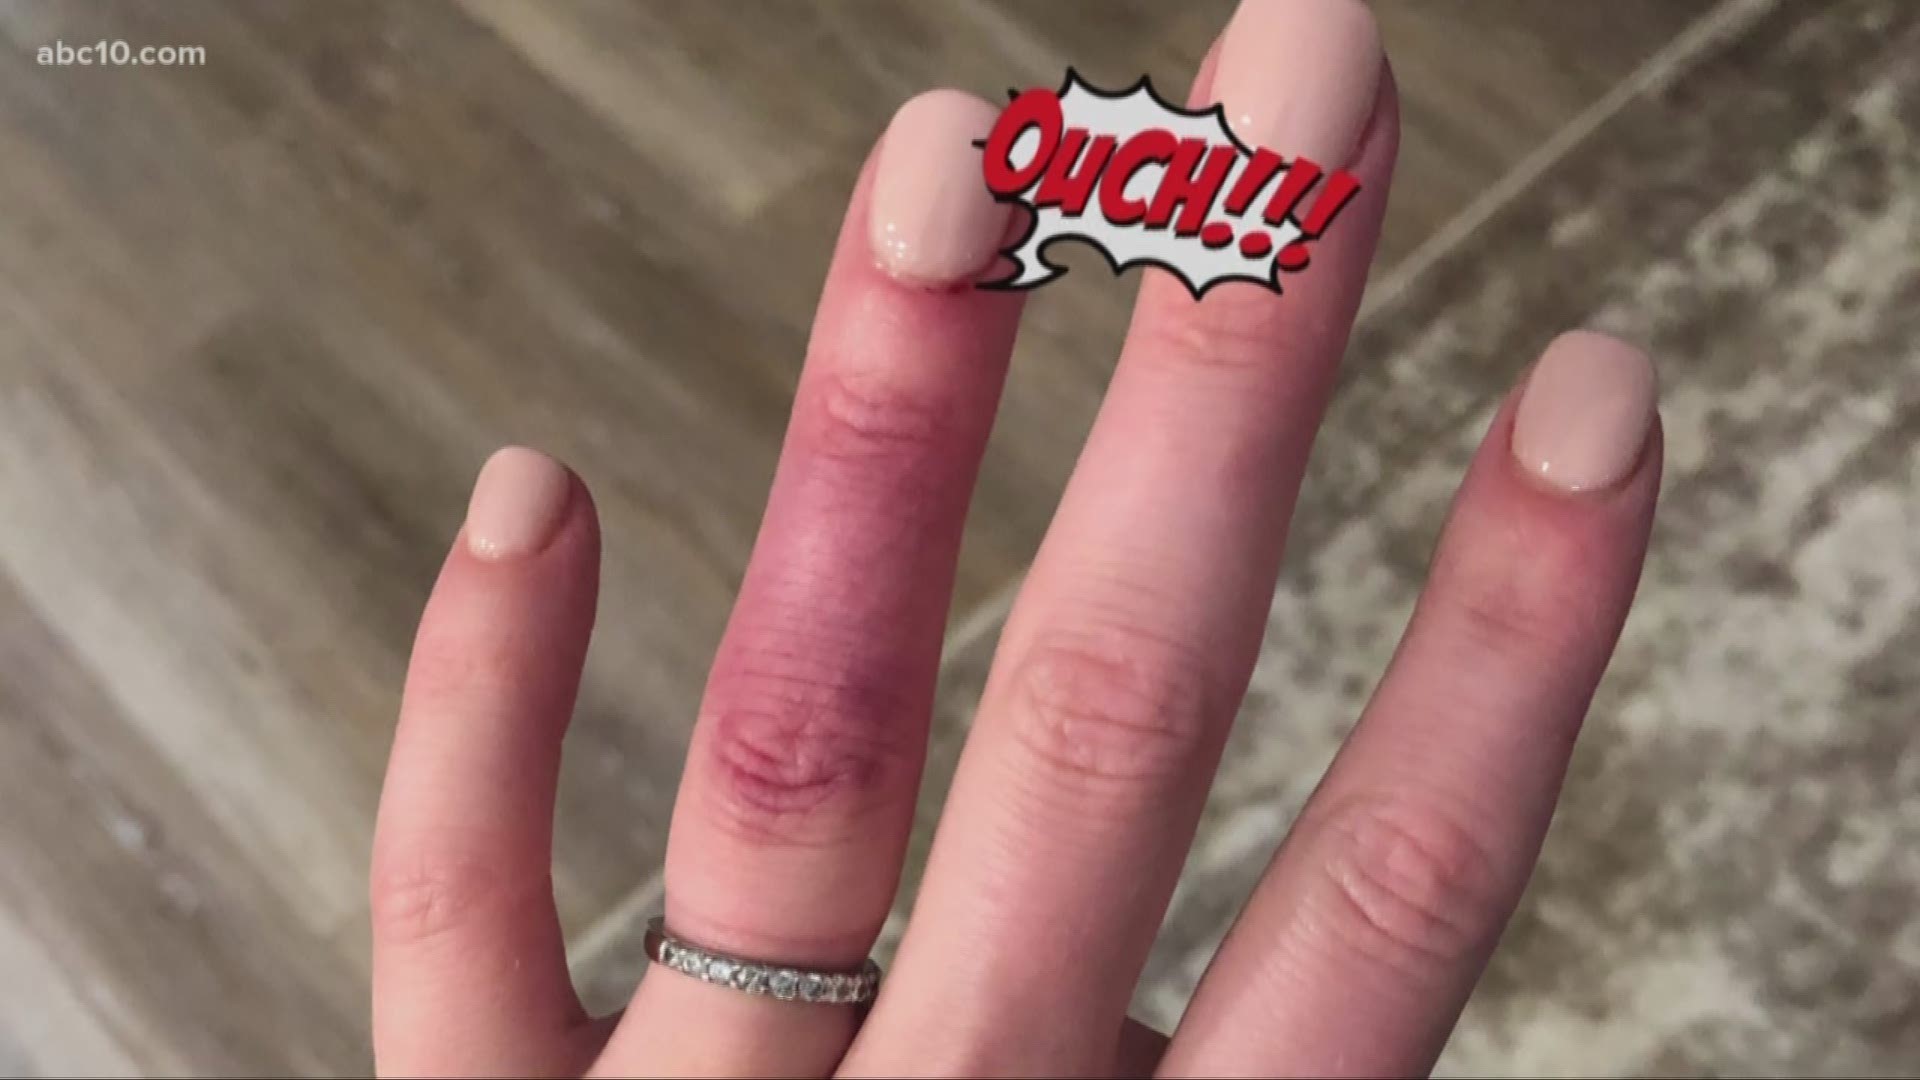 A trip to the nail salon ended with ABC10's Madison Meyer getting a painful finger infection. The incident left her wondering about the regulations that govern salons. And what consumers can do if they find themselves in a similar place.